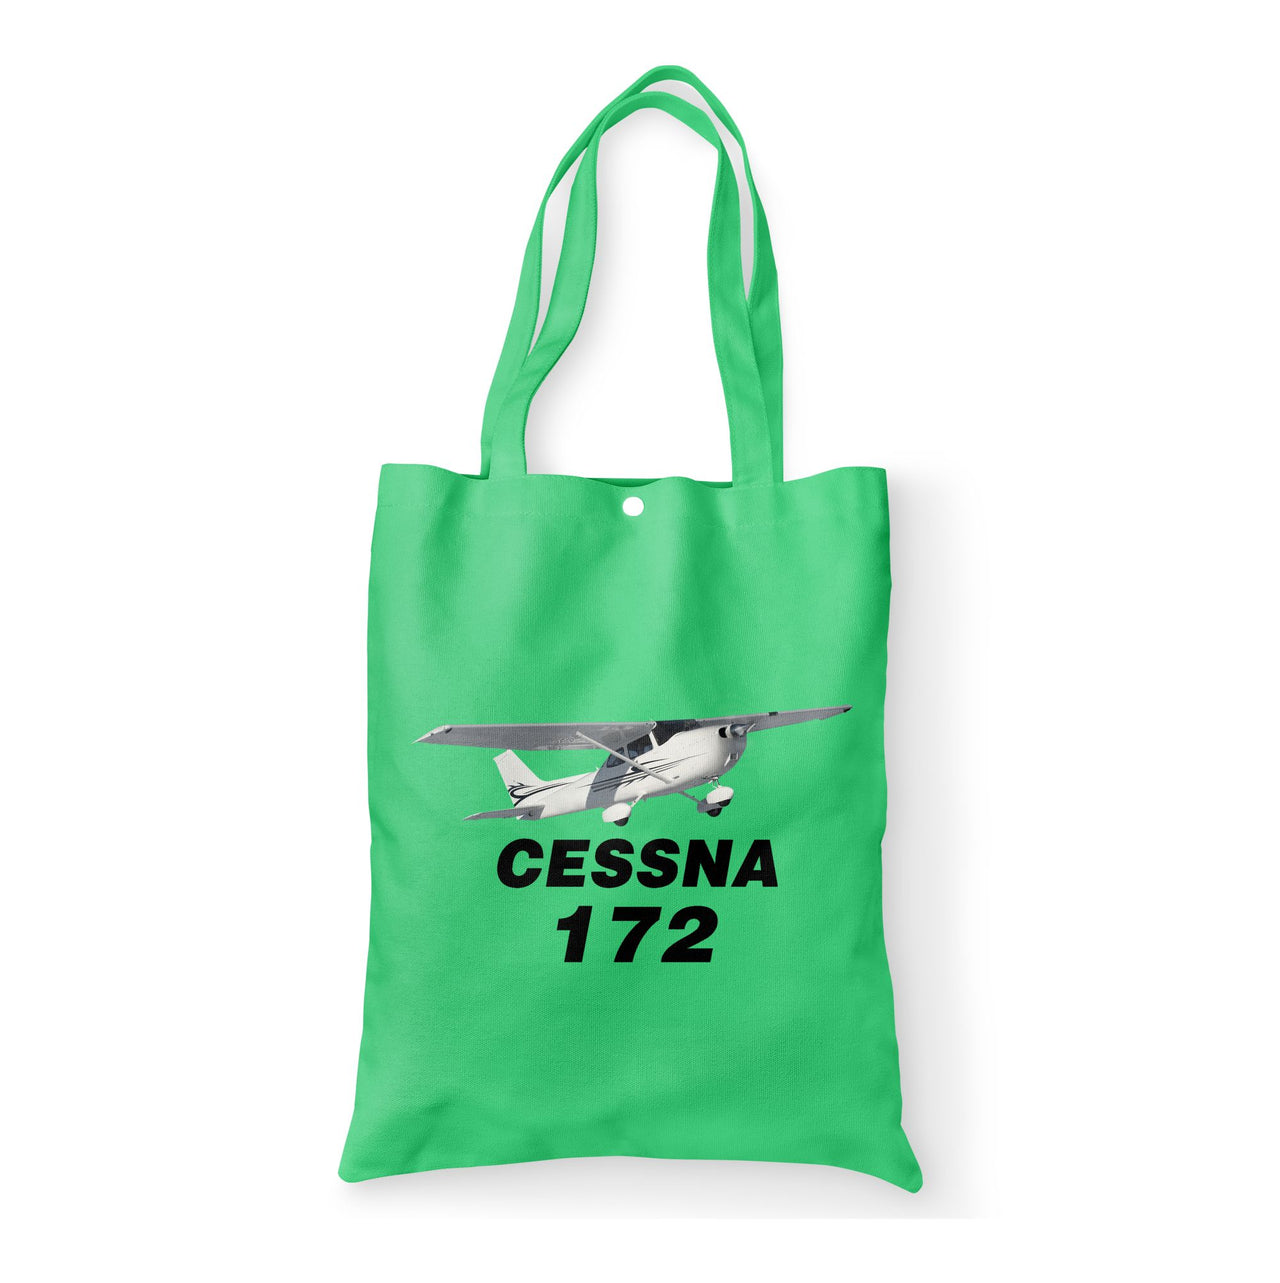 The Cessna 172 Designed Tote Bags